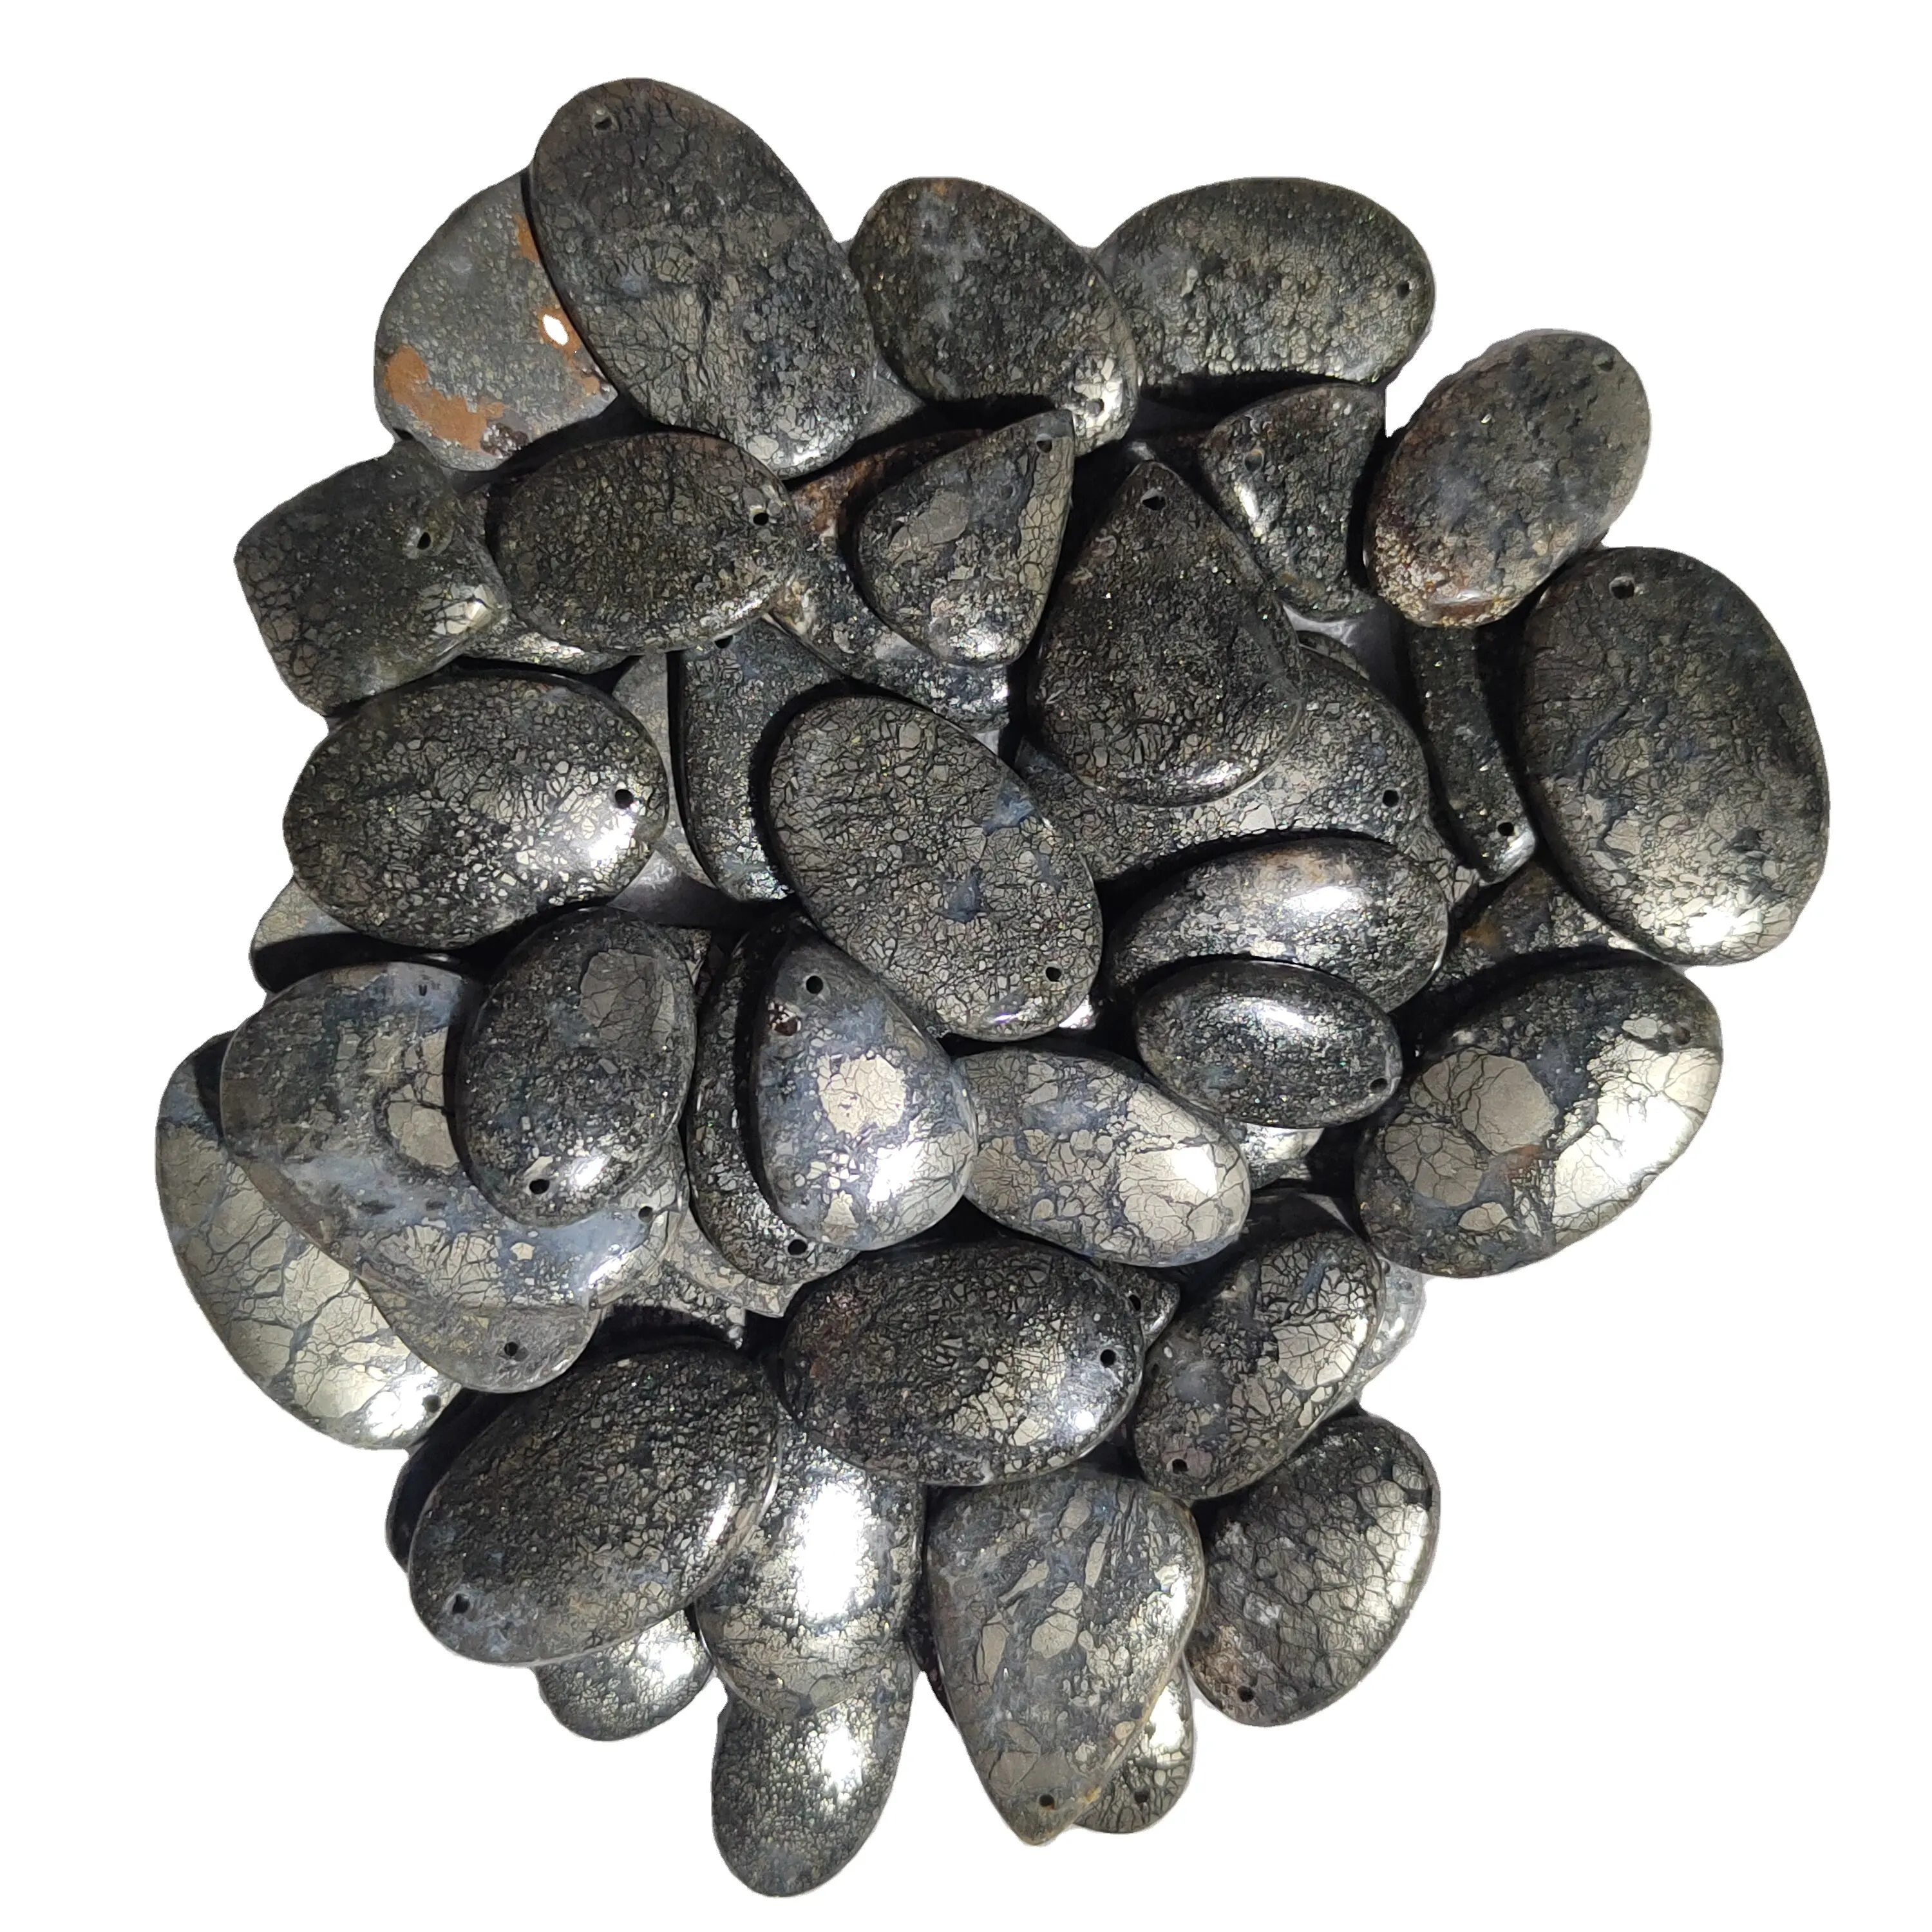 Wholesale Natural Marcasite Pyrite hand Polished Drilled Loose Gemstone Cabochon Lot For Healing Jewelry